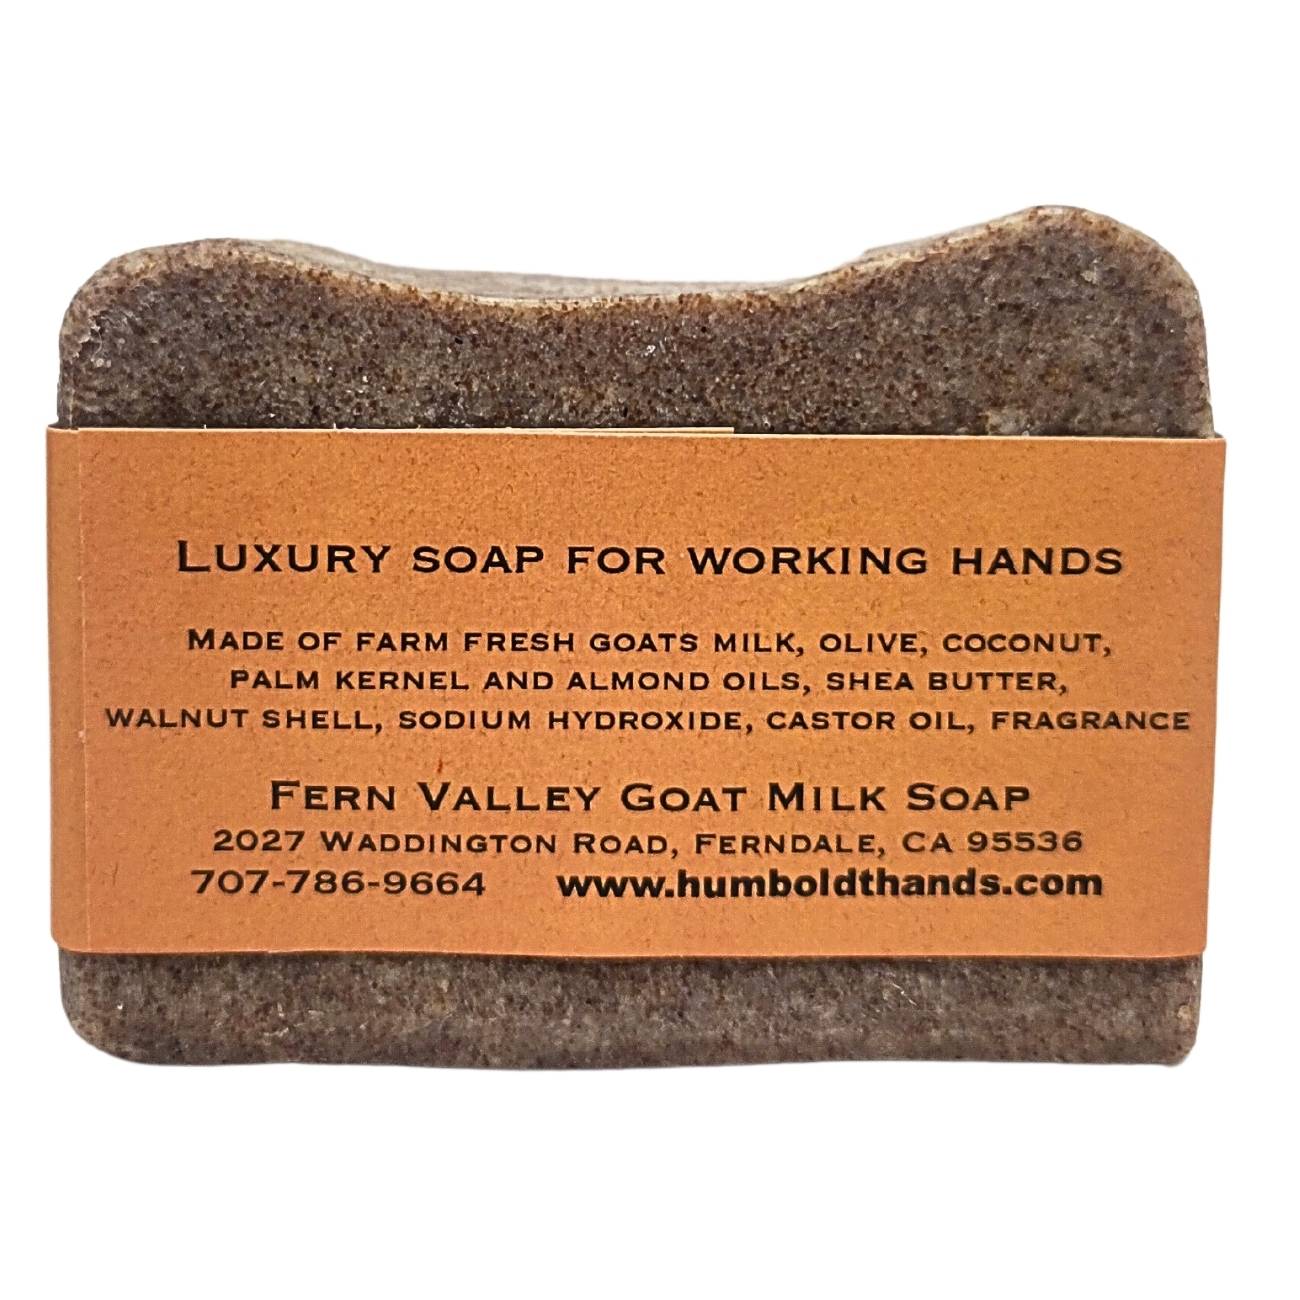 Premium Mechanic's Balsam Pine Goat Milk Soap - Cleans Your Greasy Hands and Keeps Them from Drying Out! GUARANTEED!!!